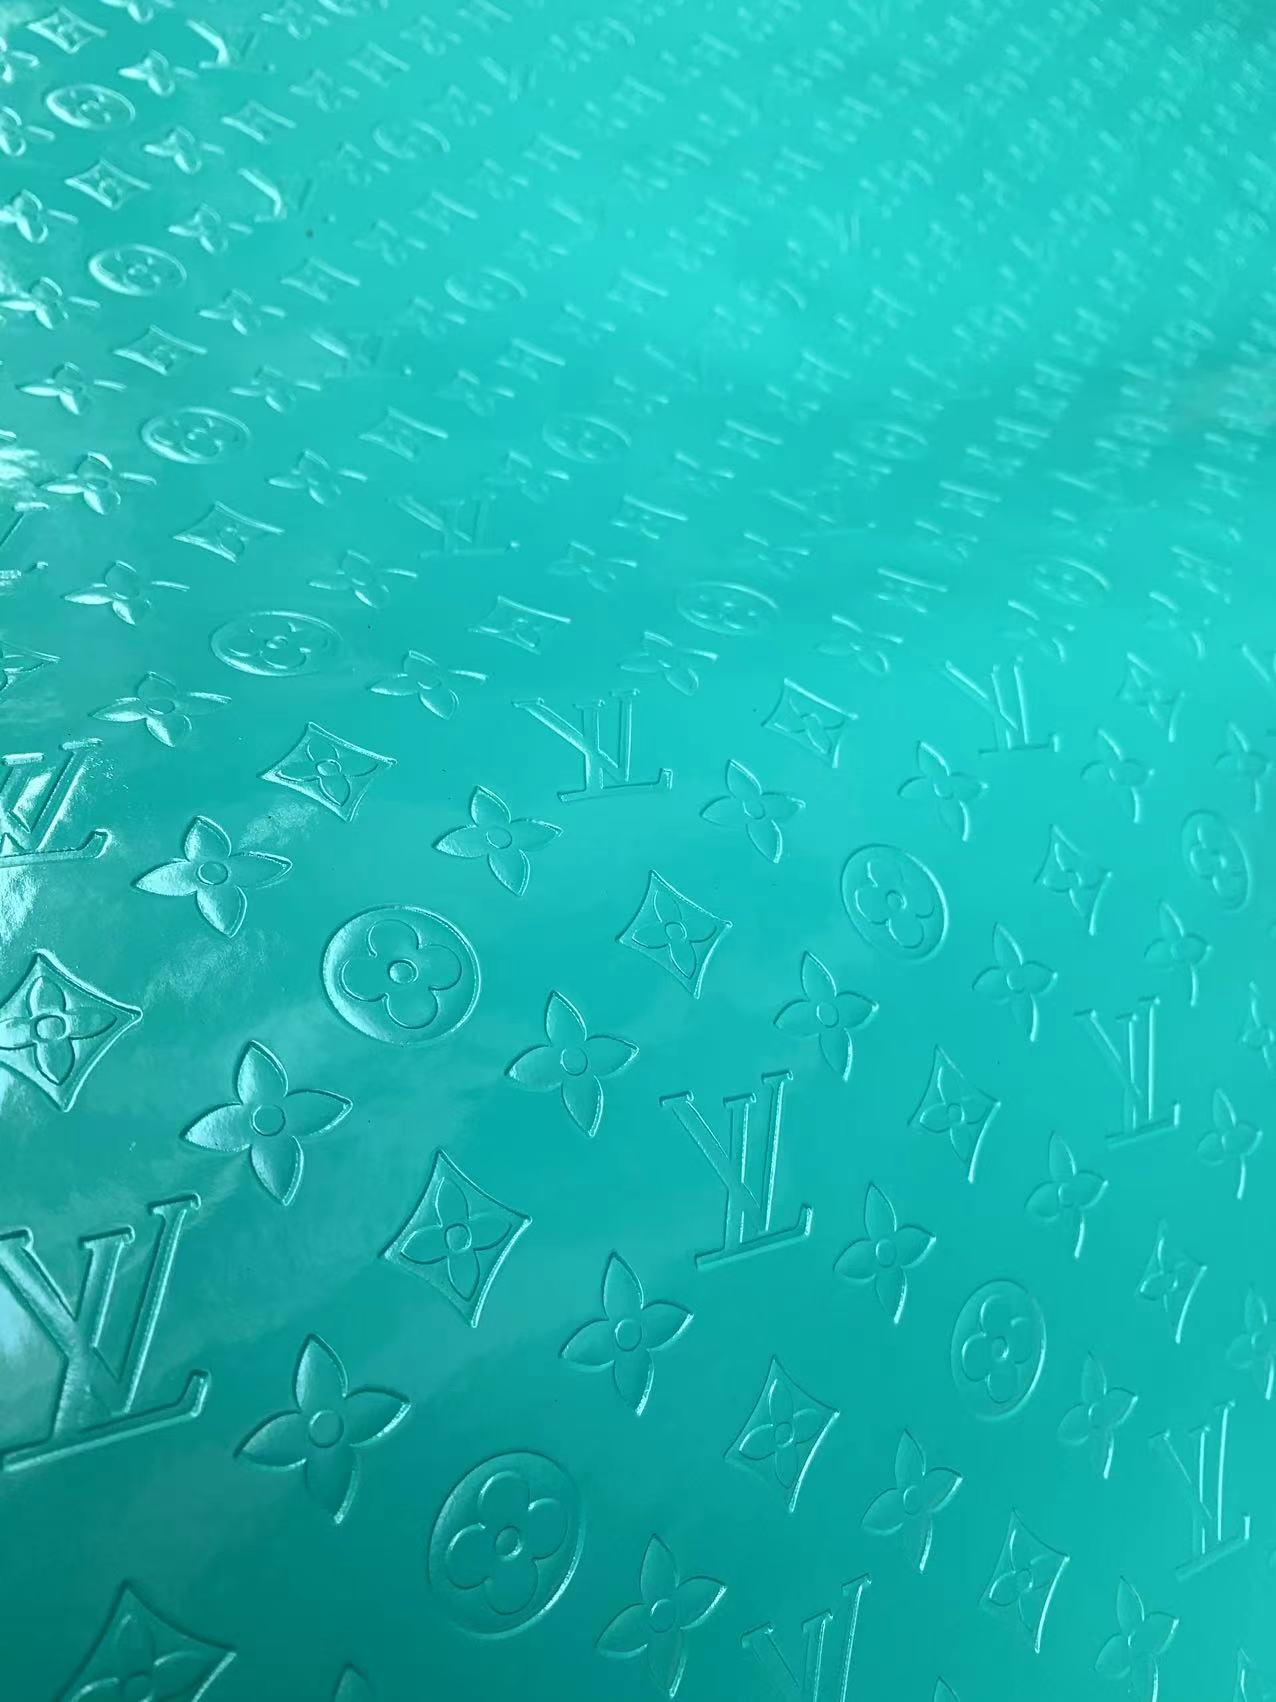 Mirror Reflective Turquoise Embossed LV Designer Fabric for DIY Sneakers Handmade Crafts